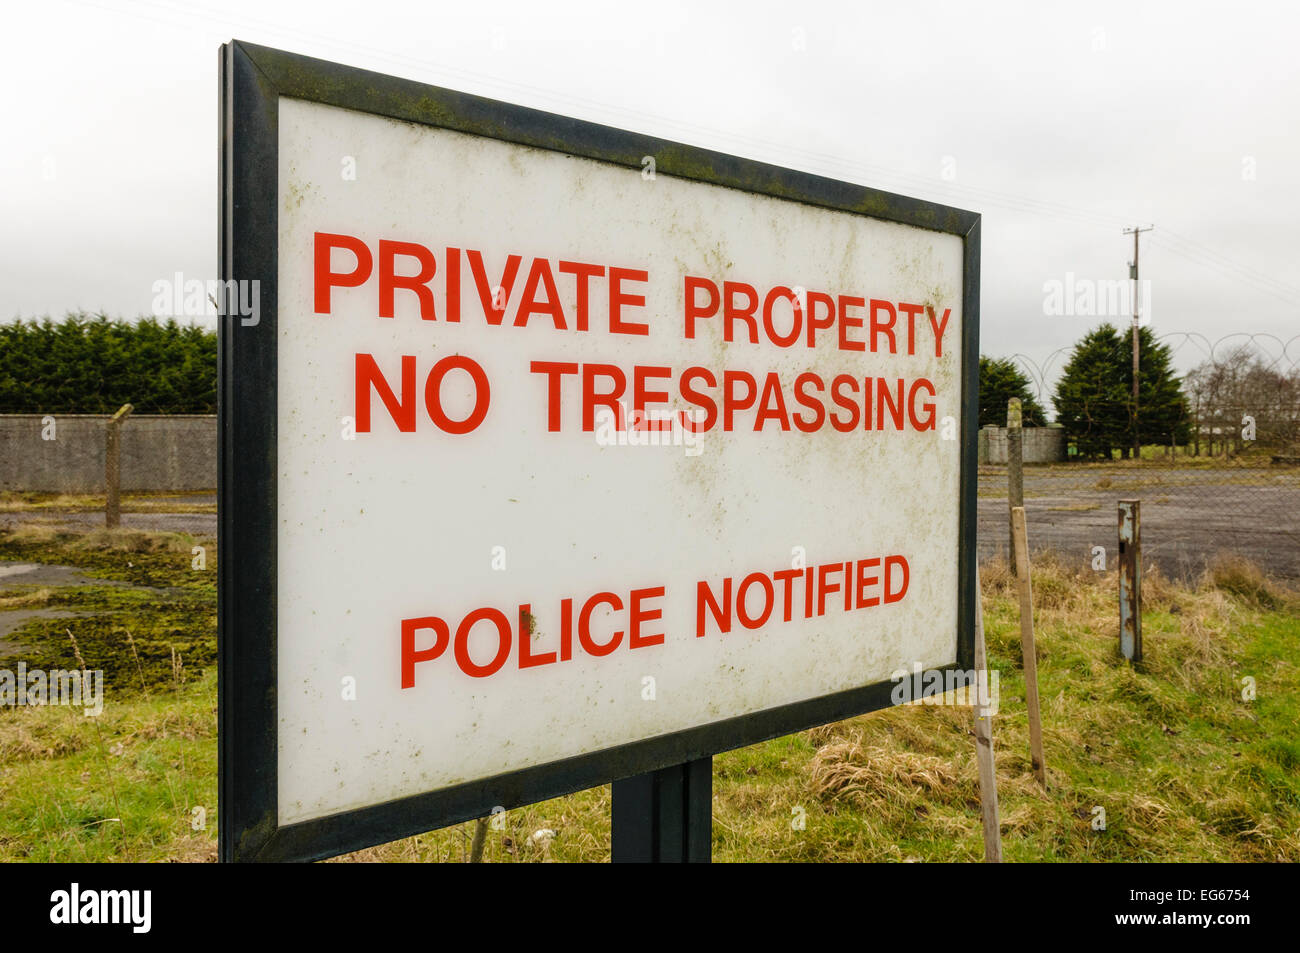 Sign advising public that this is private property, no trespassing, police notified Stock Photo